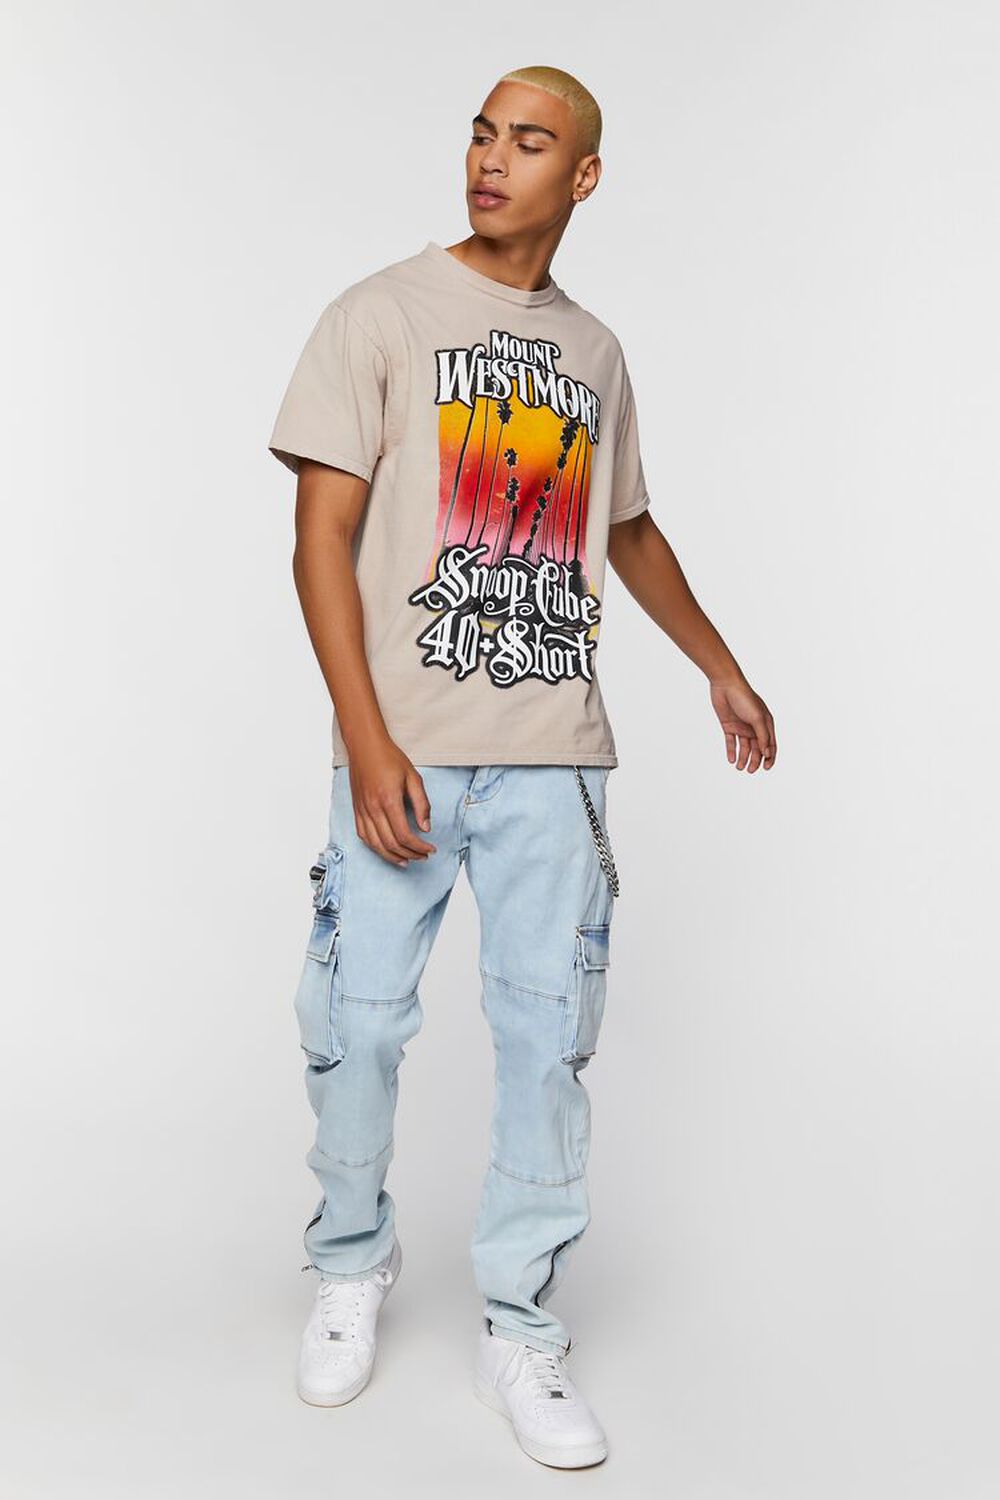 Mount Westmore Graphic Tee